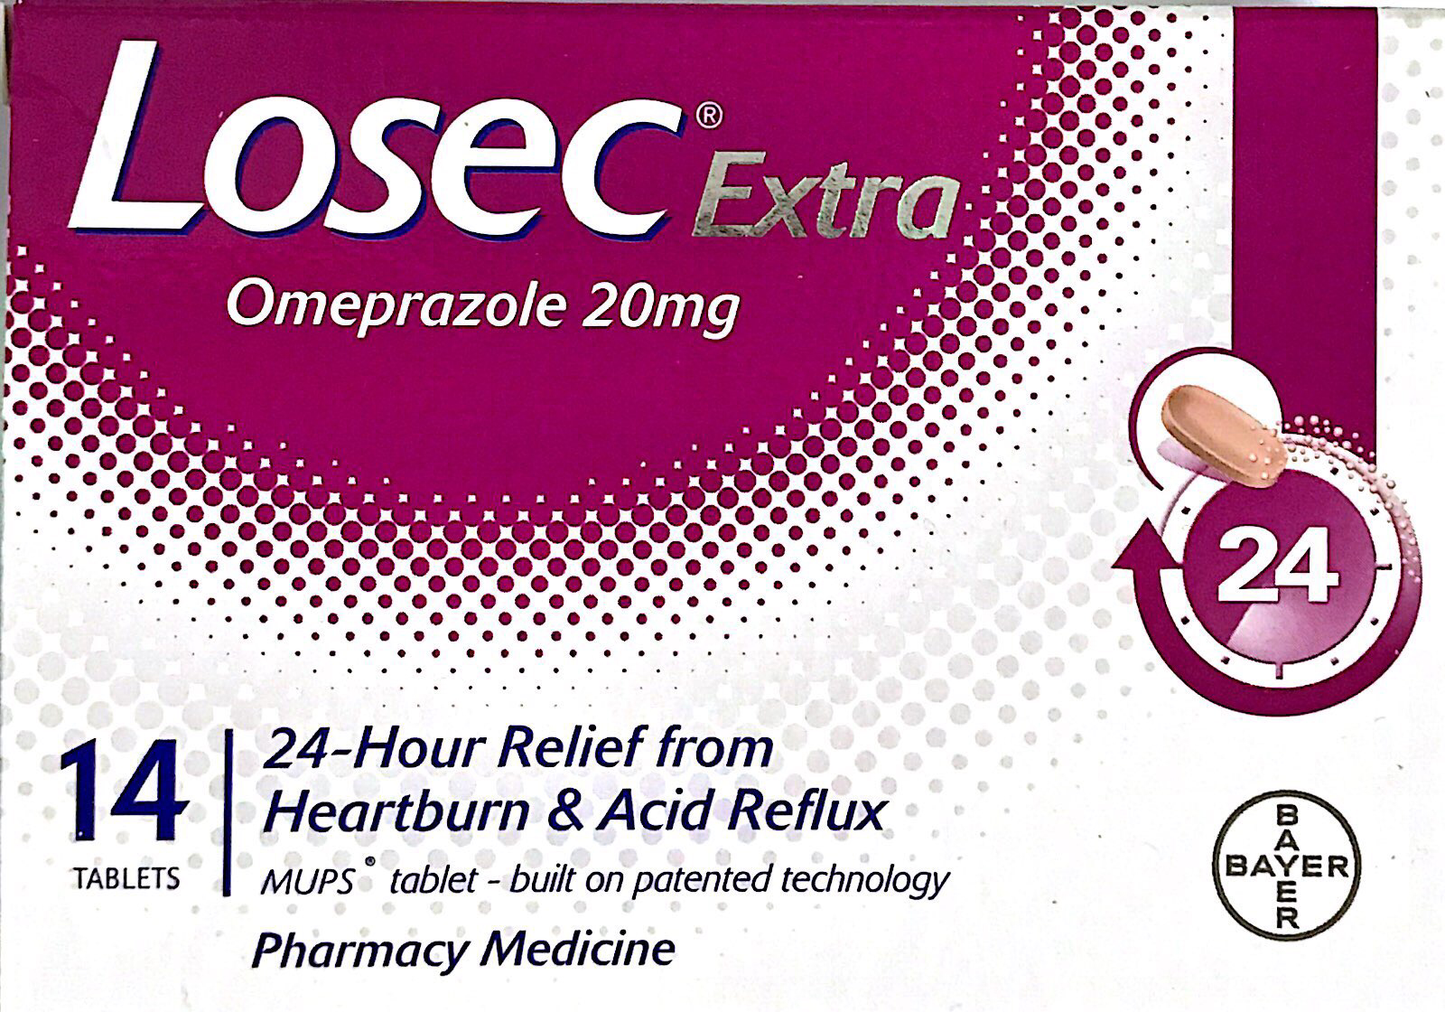 Losec Extra Omeprazole 20 mg 14 tablets